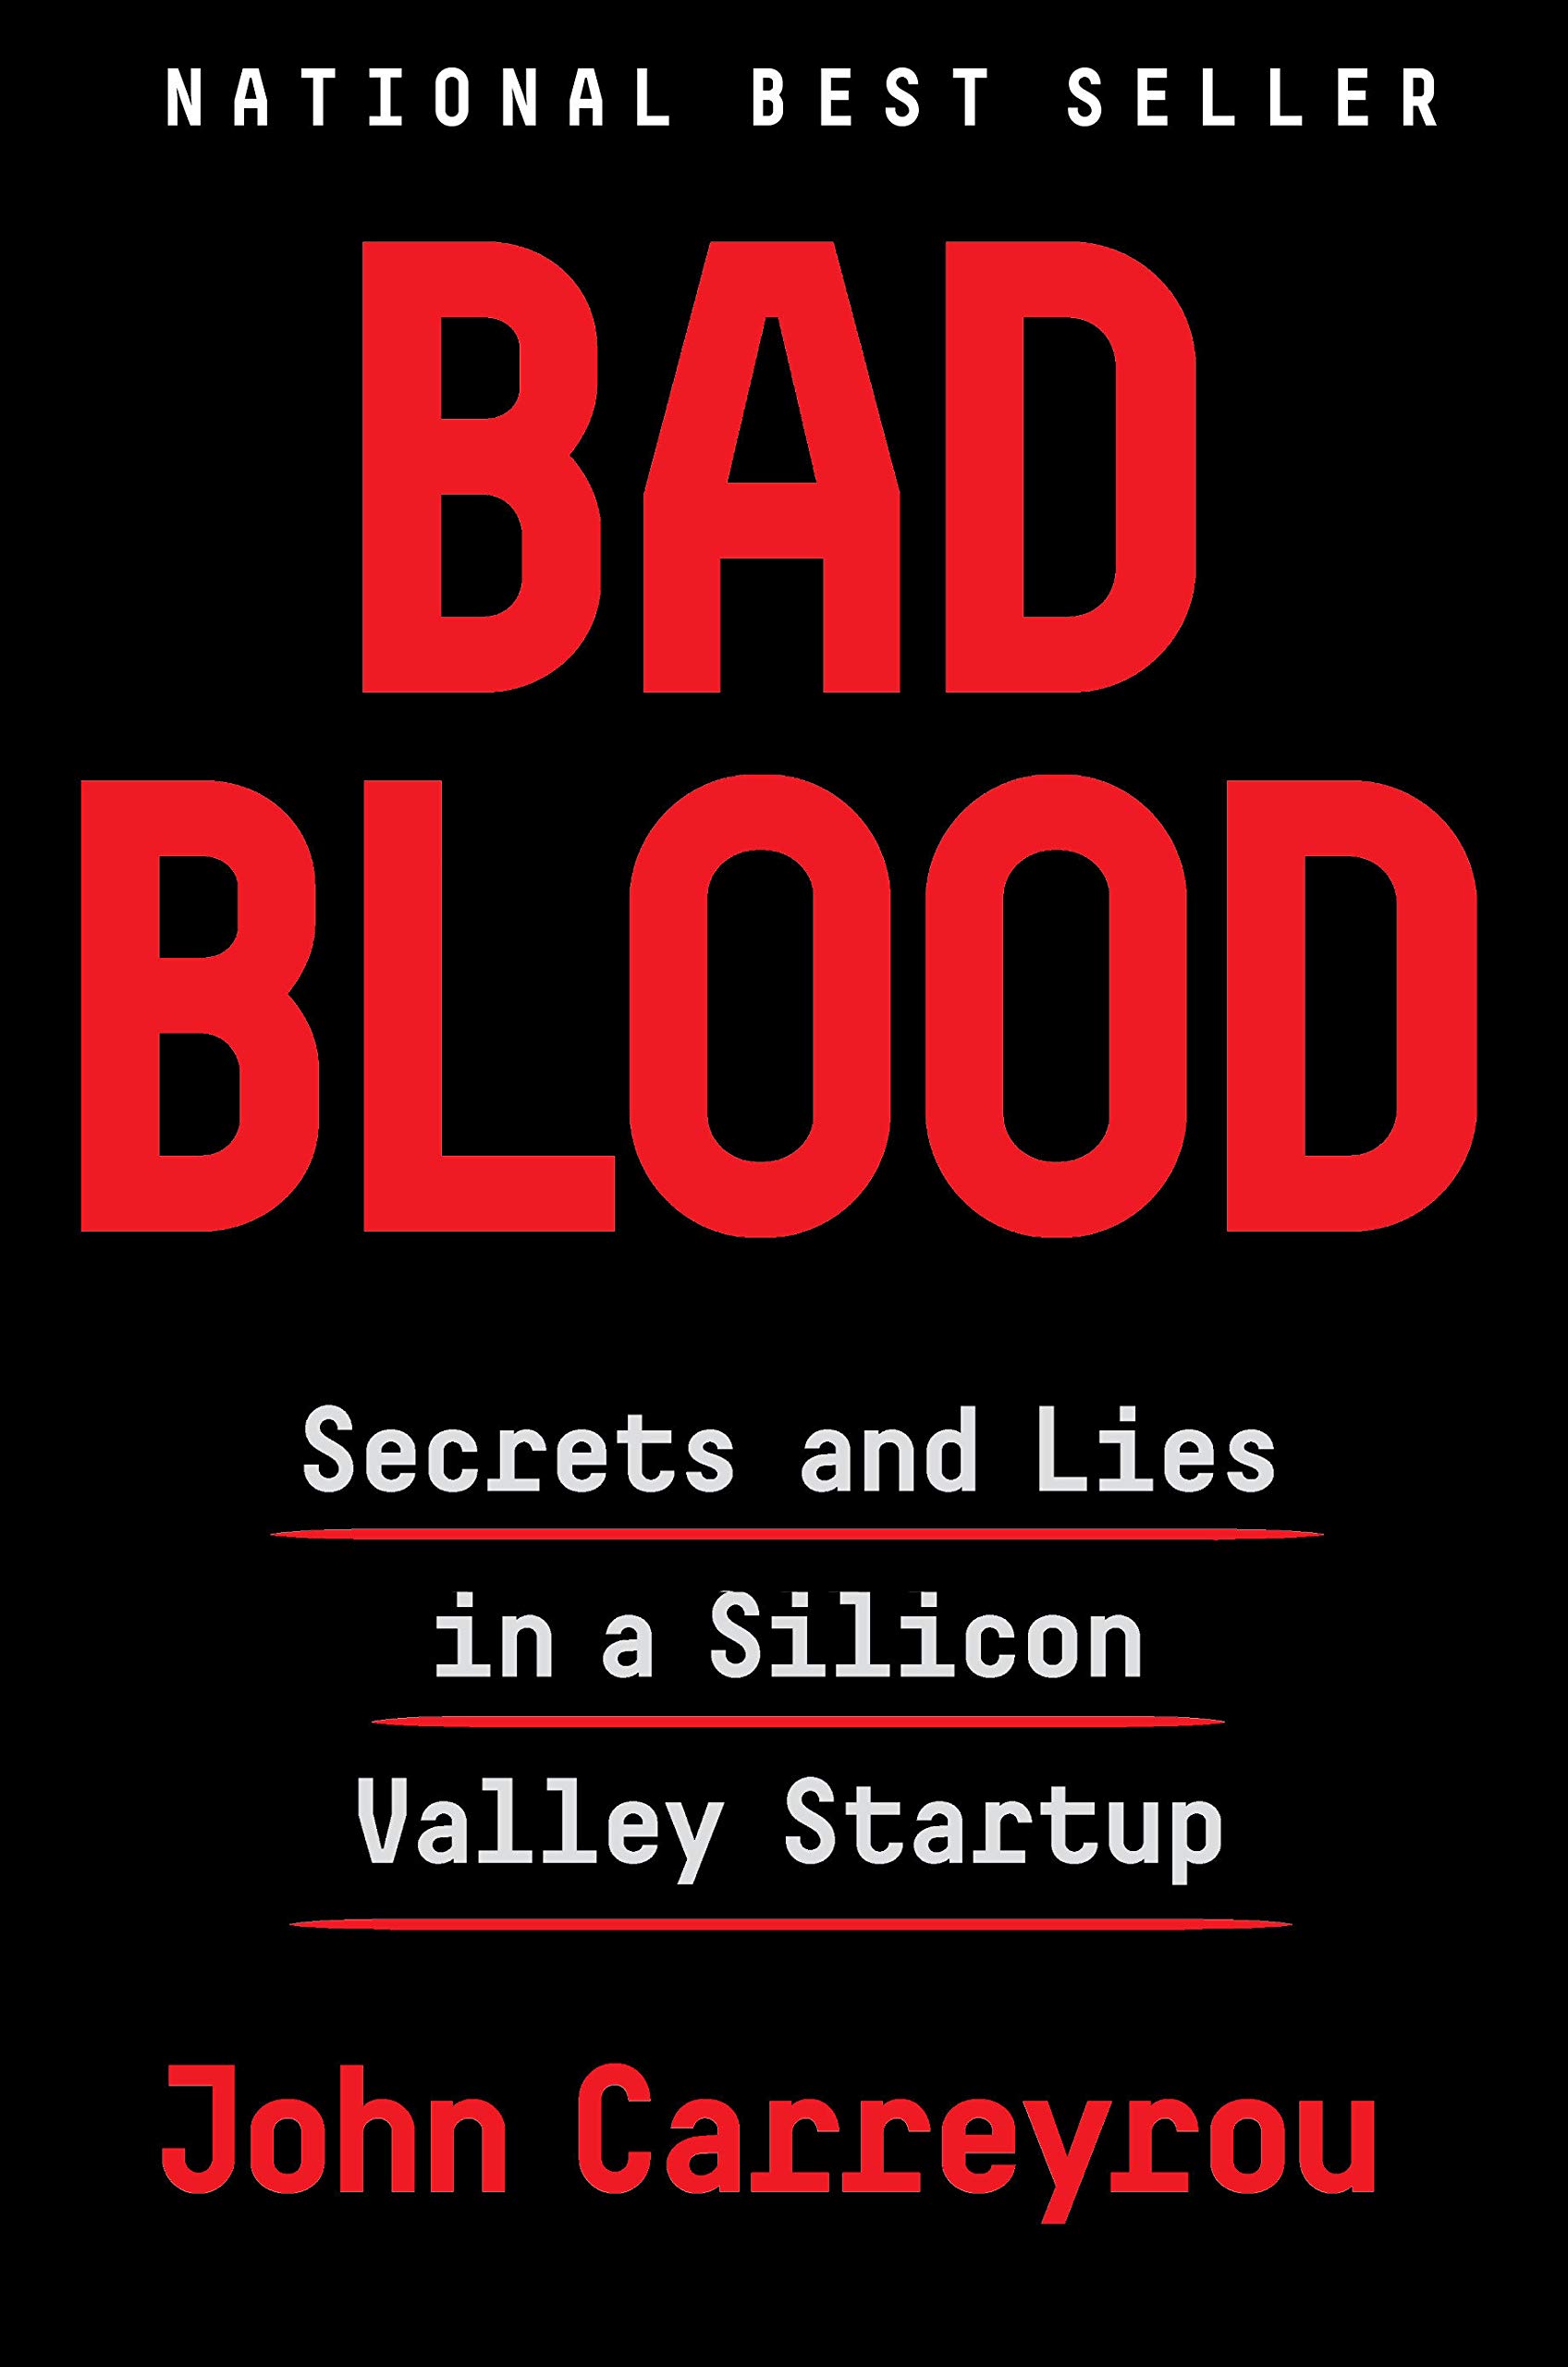 Cover of Bad Blood. The title and author's name are in red on a black background, while the subtitle is in white.